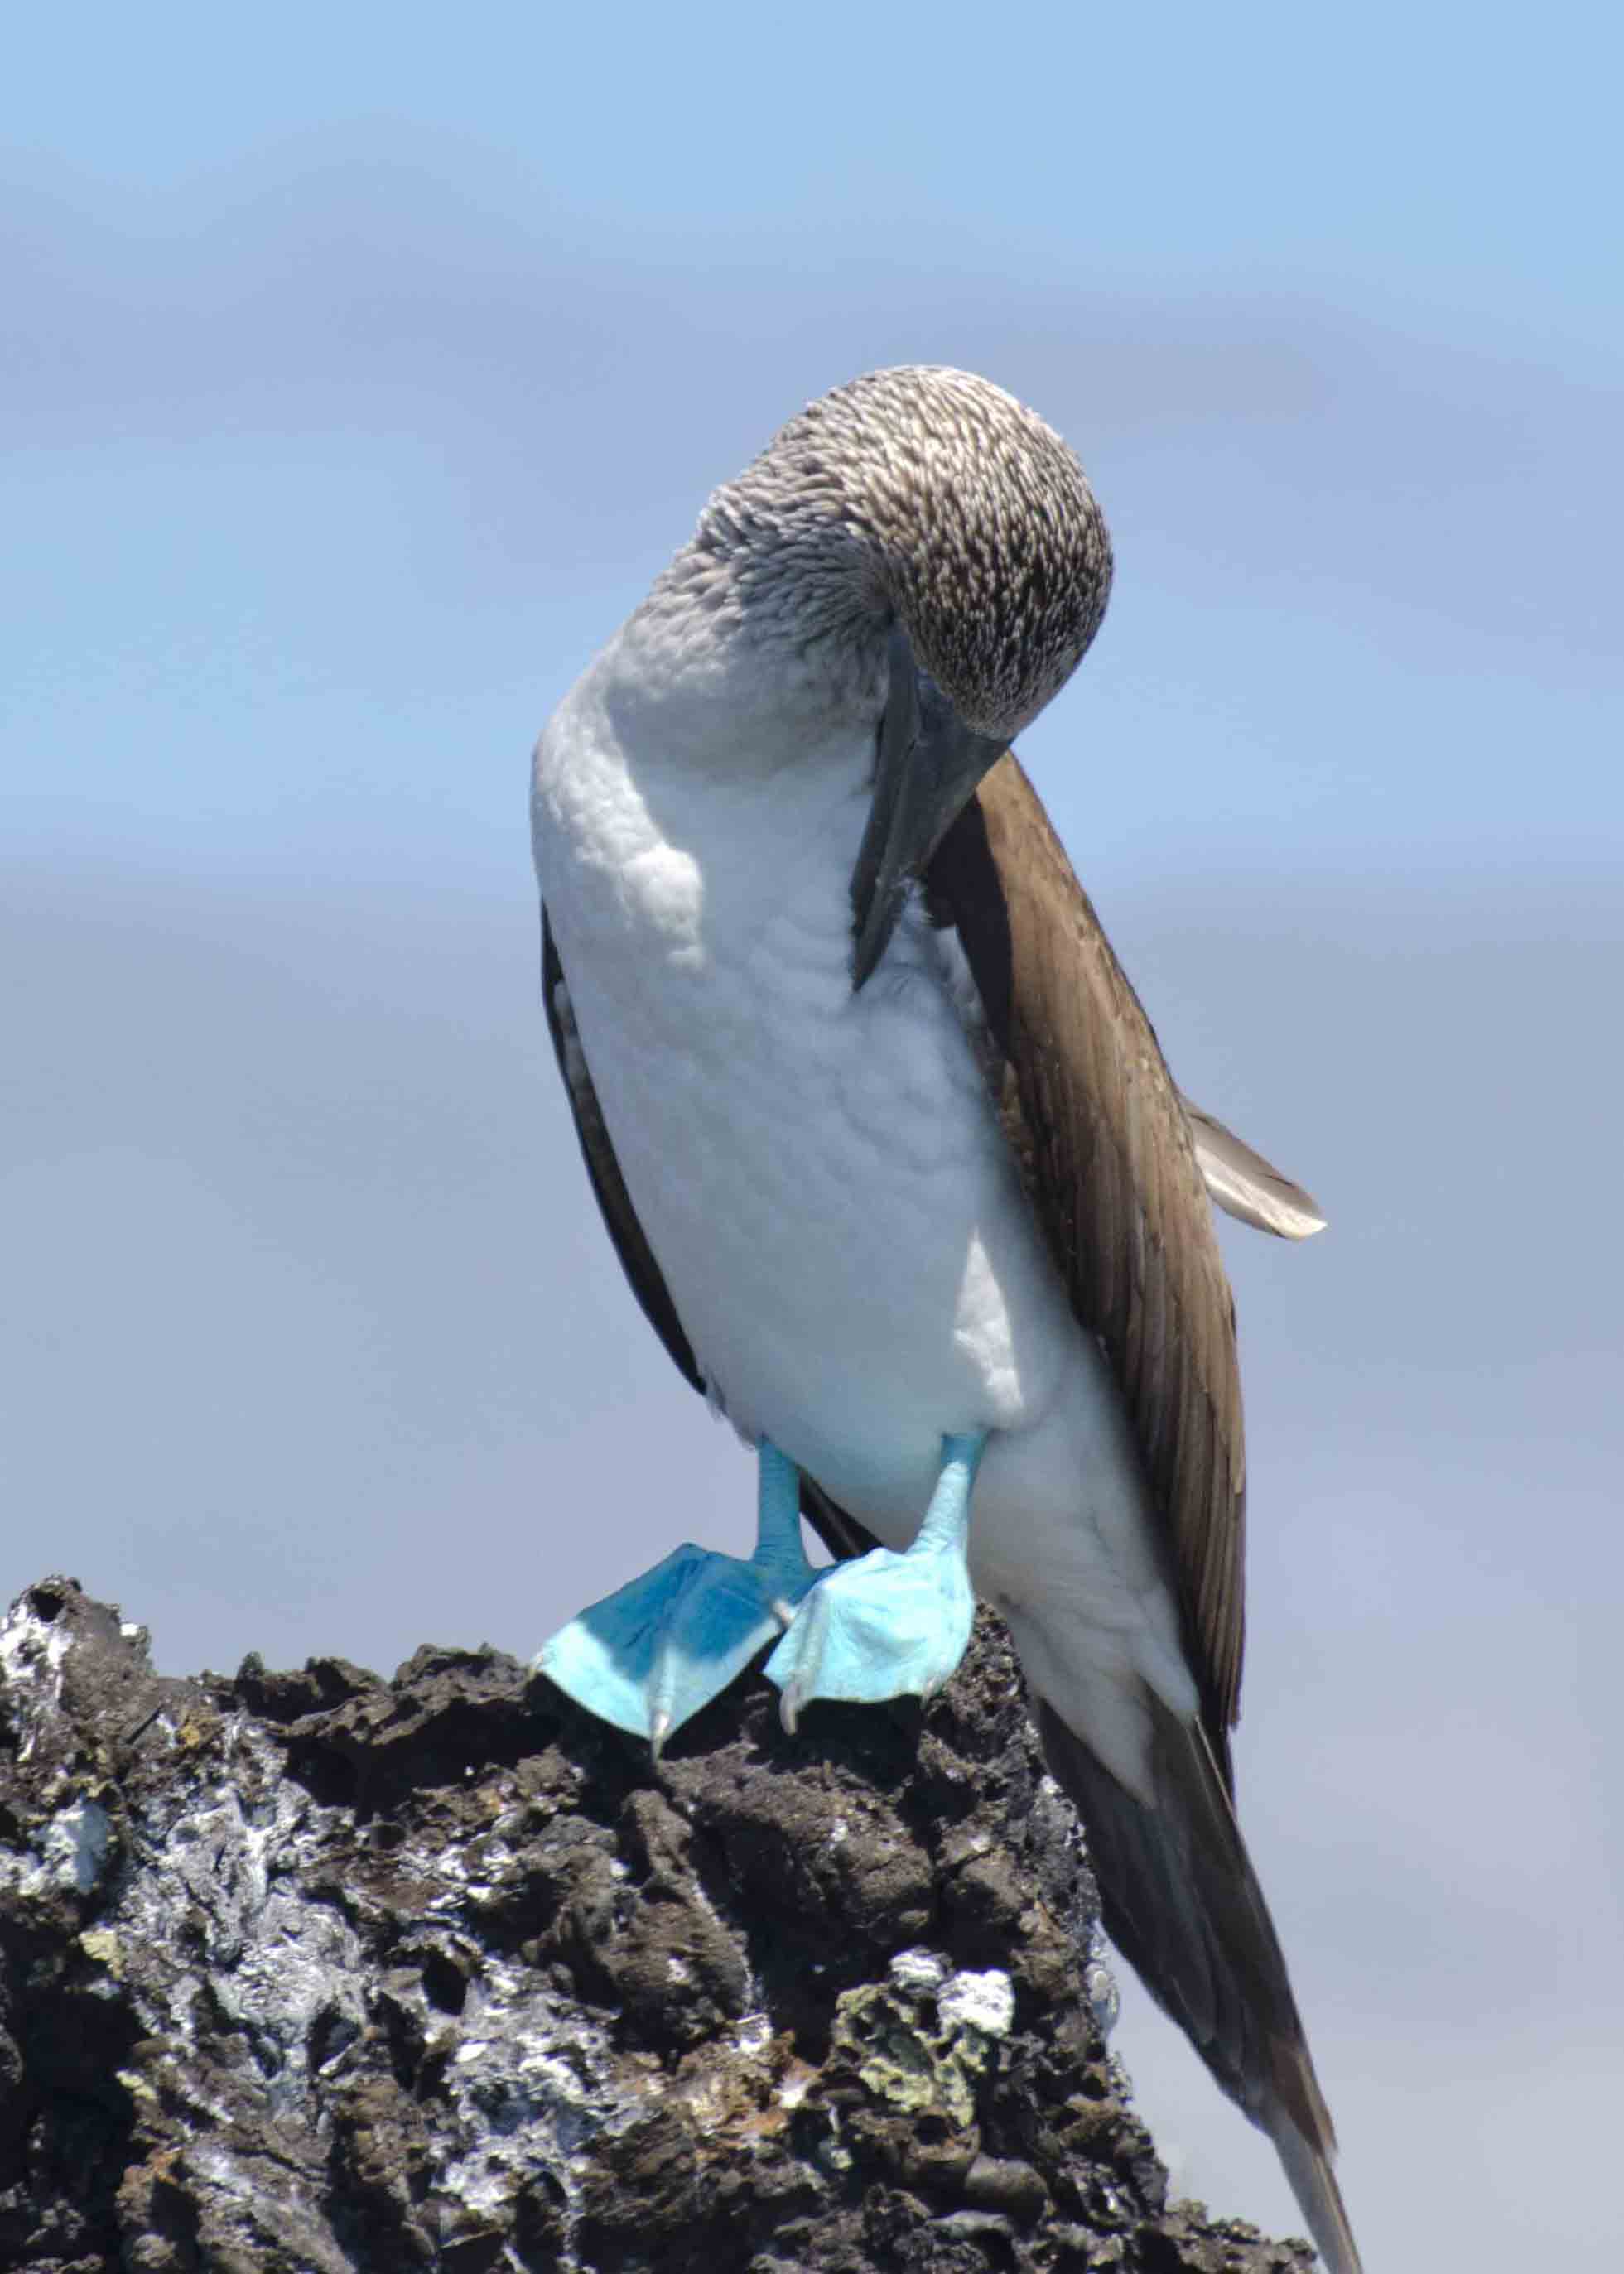 Blue-footed Booby found at Las Tintoreras, Isla Isabela, The Galapagos.